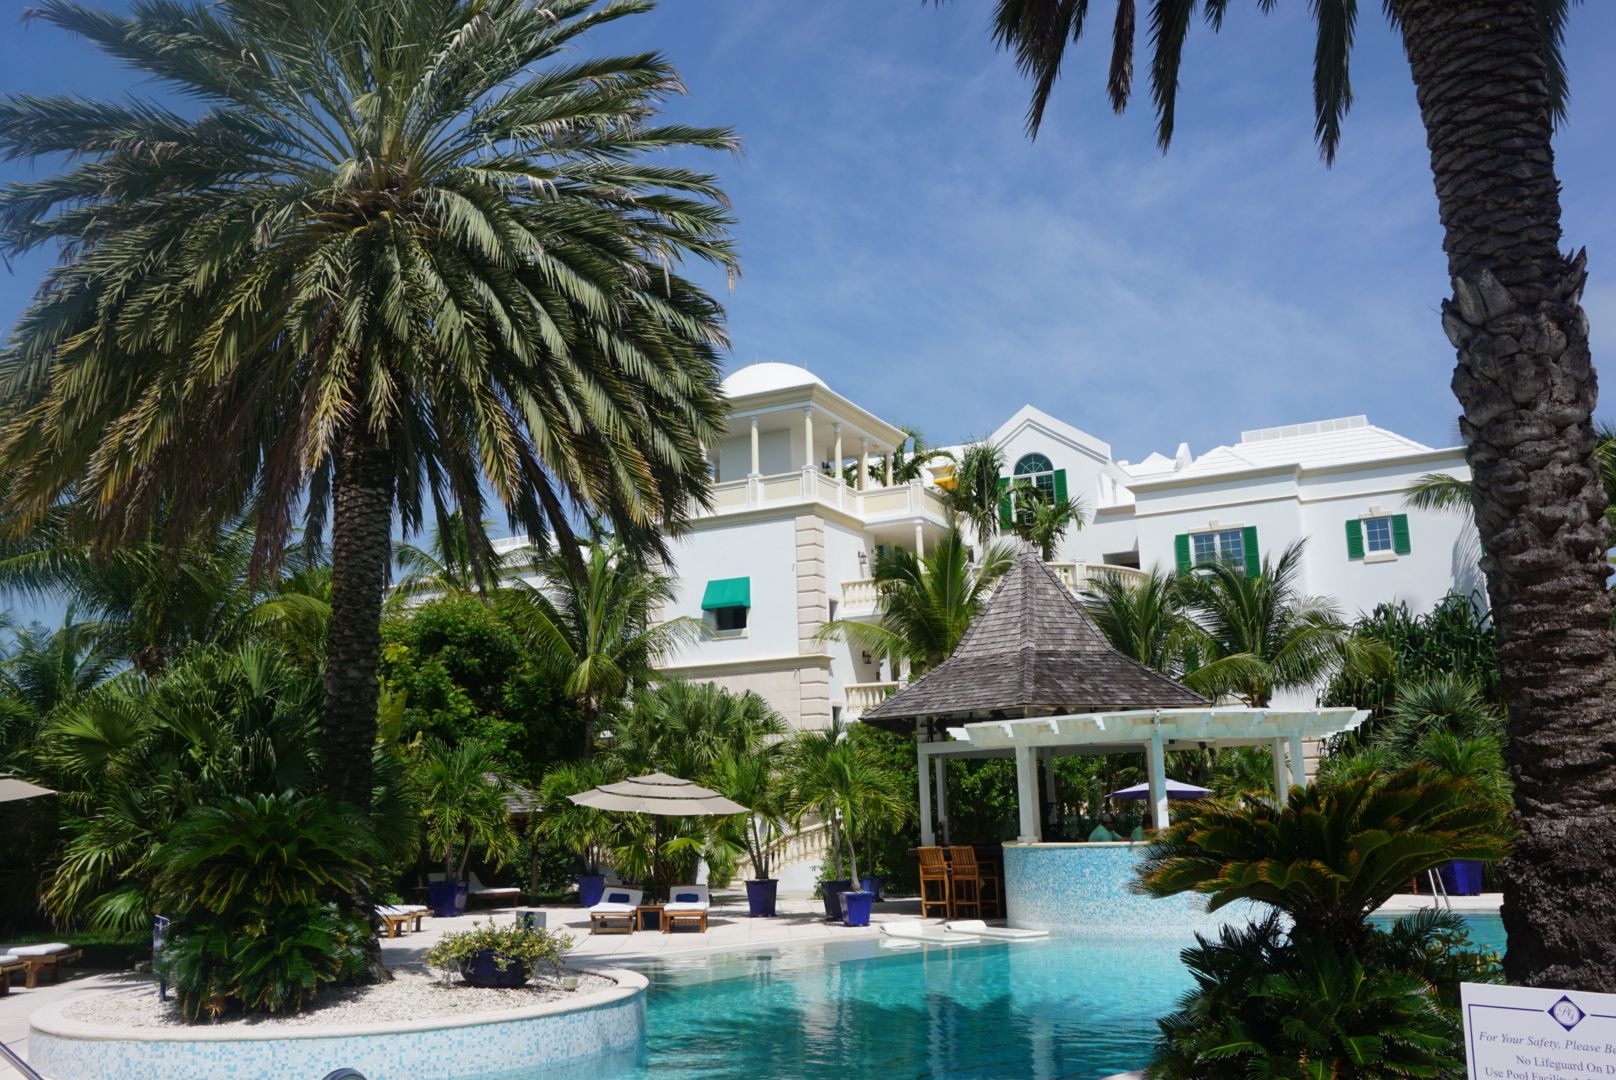 Point Grace Hotel in Turks and Caicos 